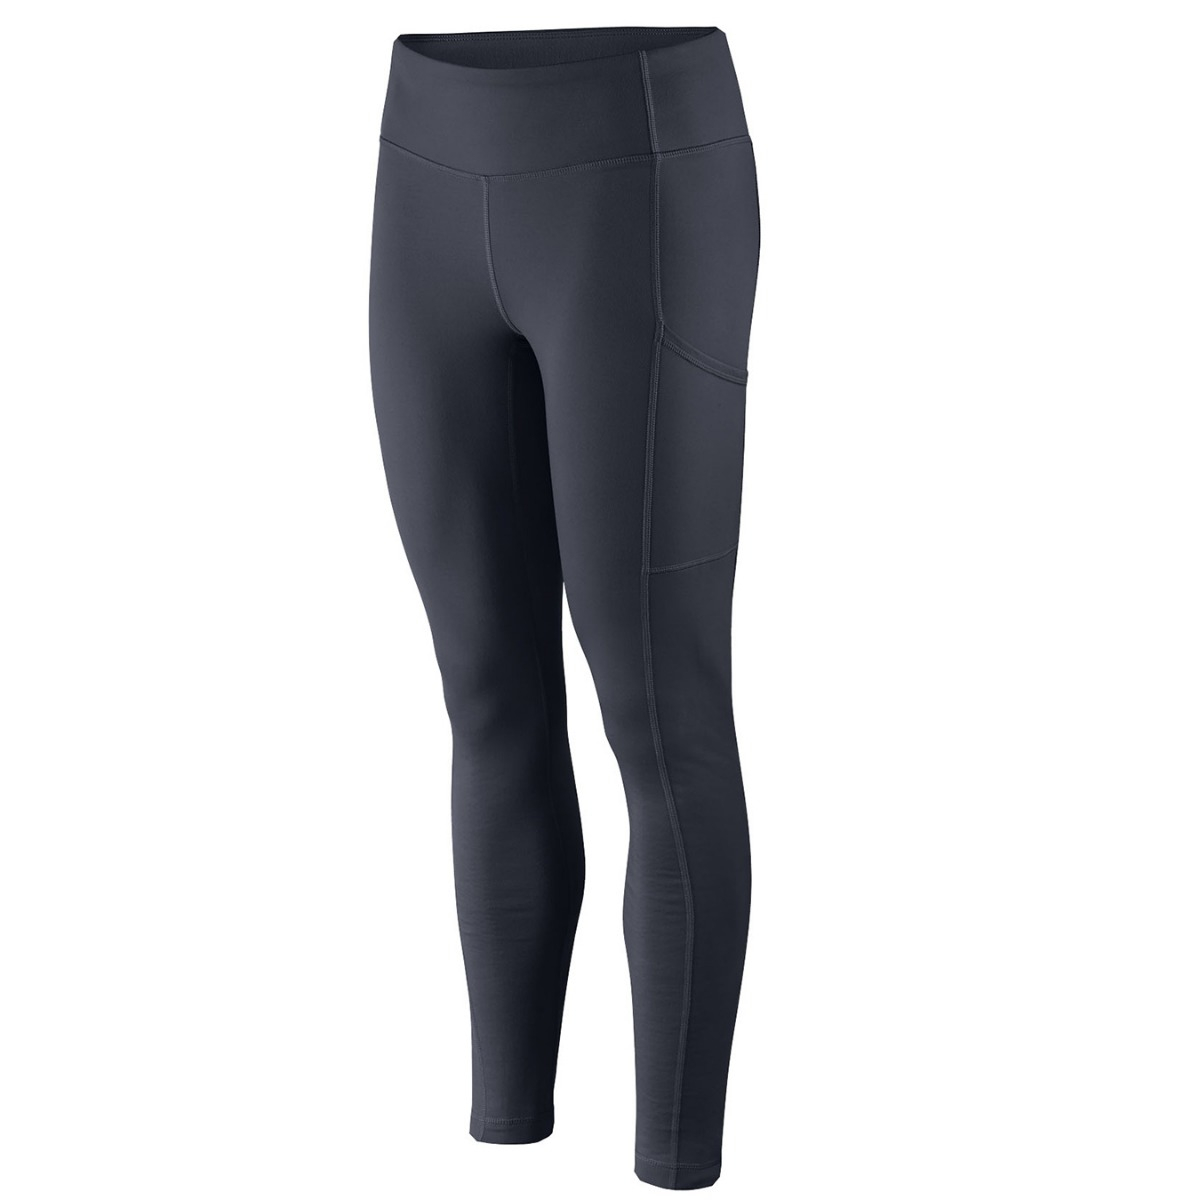 Patagonia Women's Pack Out Tights - Smolder Blue